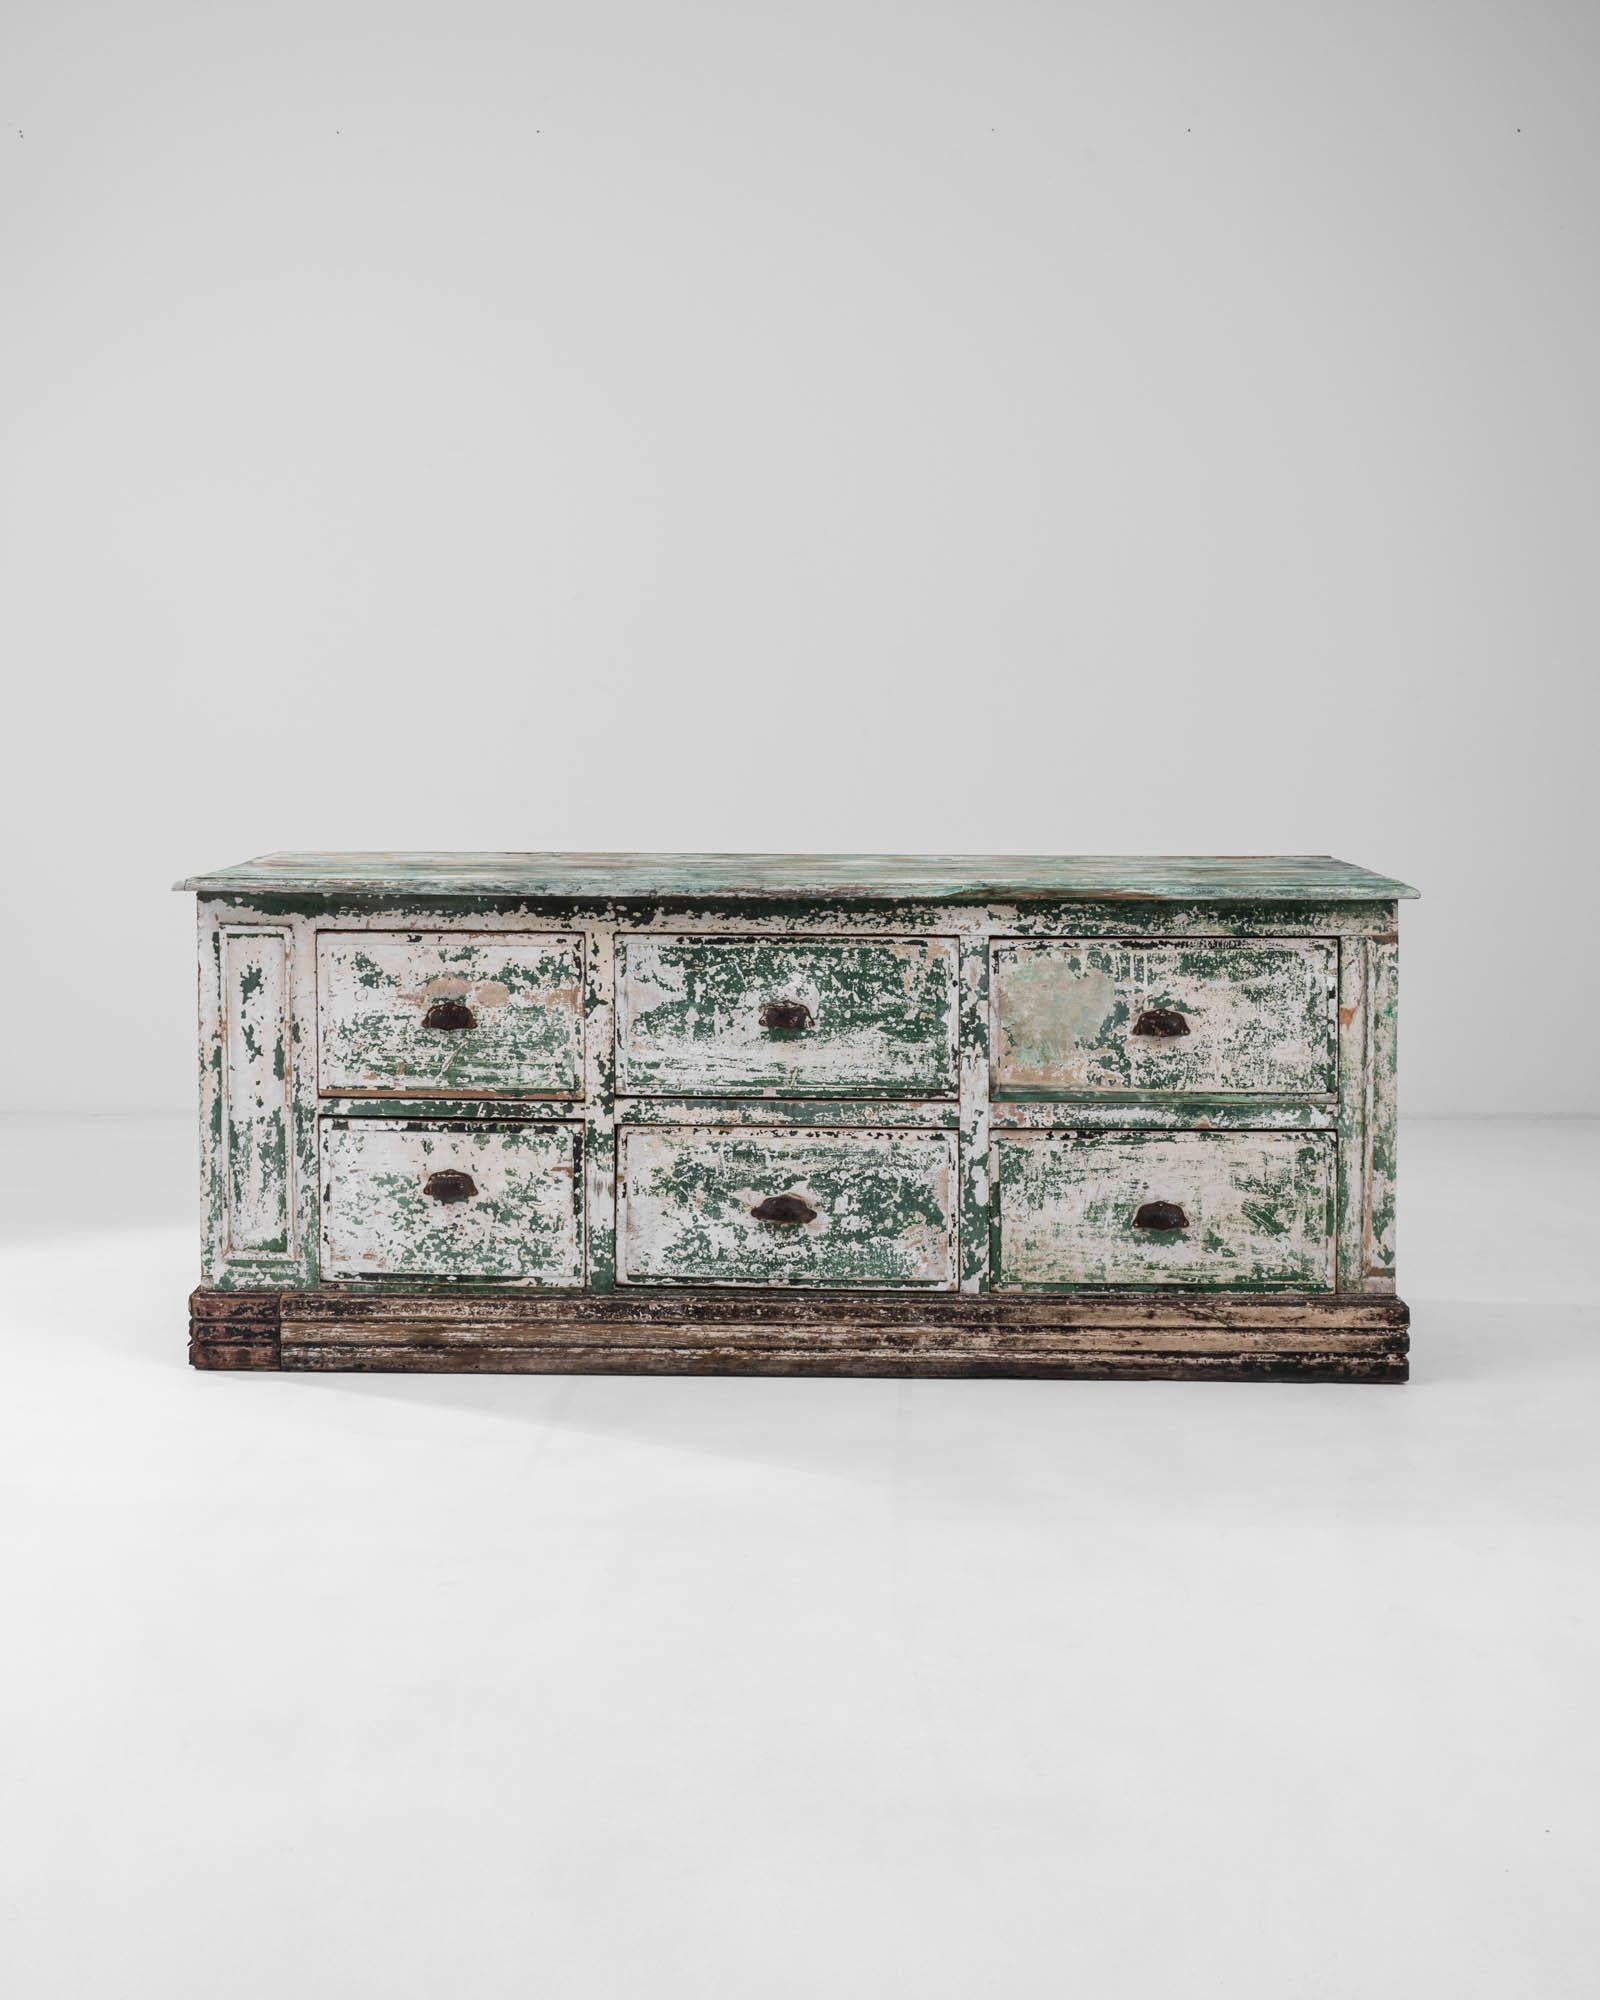 The striking contrast between its orderly composition and lively, textural patina gives this vintage wooden chest of drawers a unique and compelling personality. Built in France at the turn of the century, the broad cabinet houses six deep